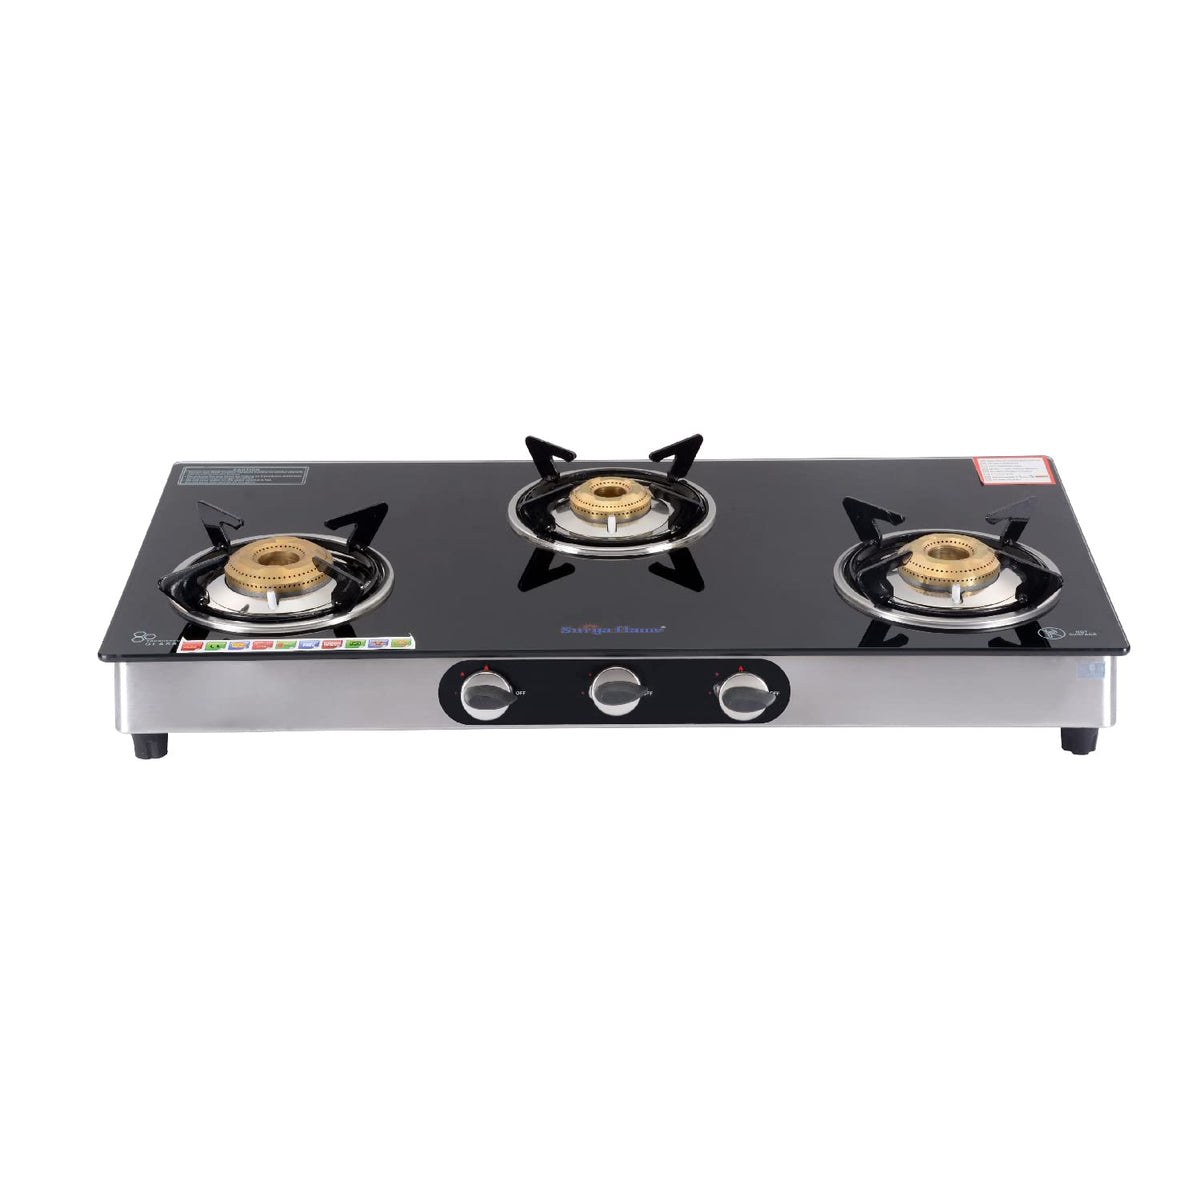 SuryaFlame Supreme Gas Stove 3 Burners Glass Top | Stainless Steel Body | LPG Stove with Jumbo Burner & Spill Proof Design - 2 Years Complete Doorstep Warranty